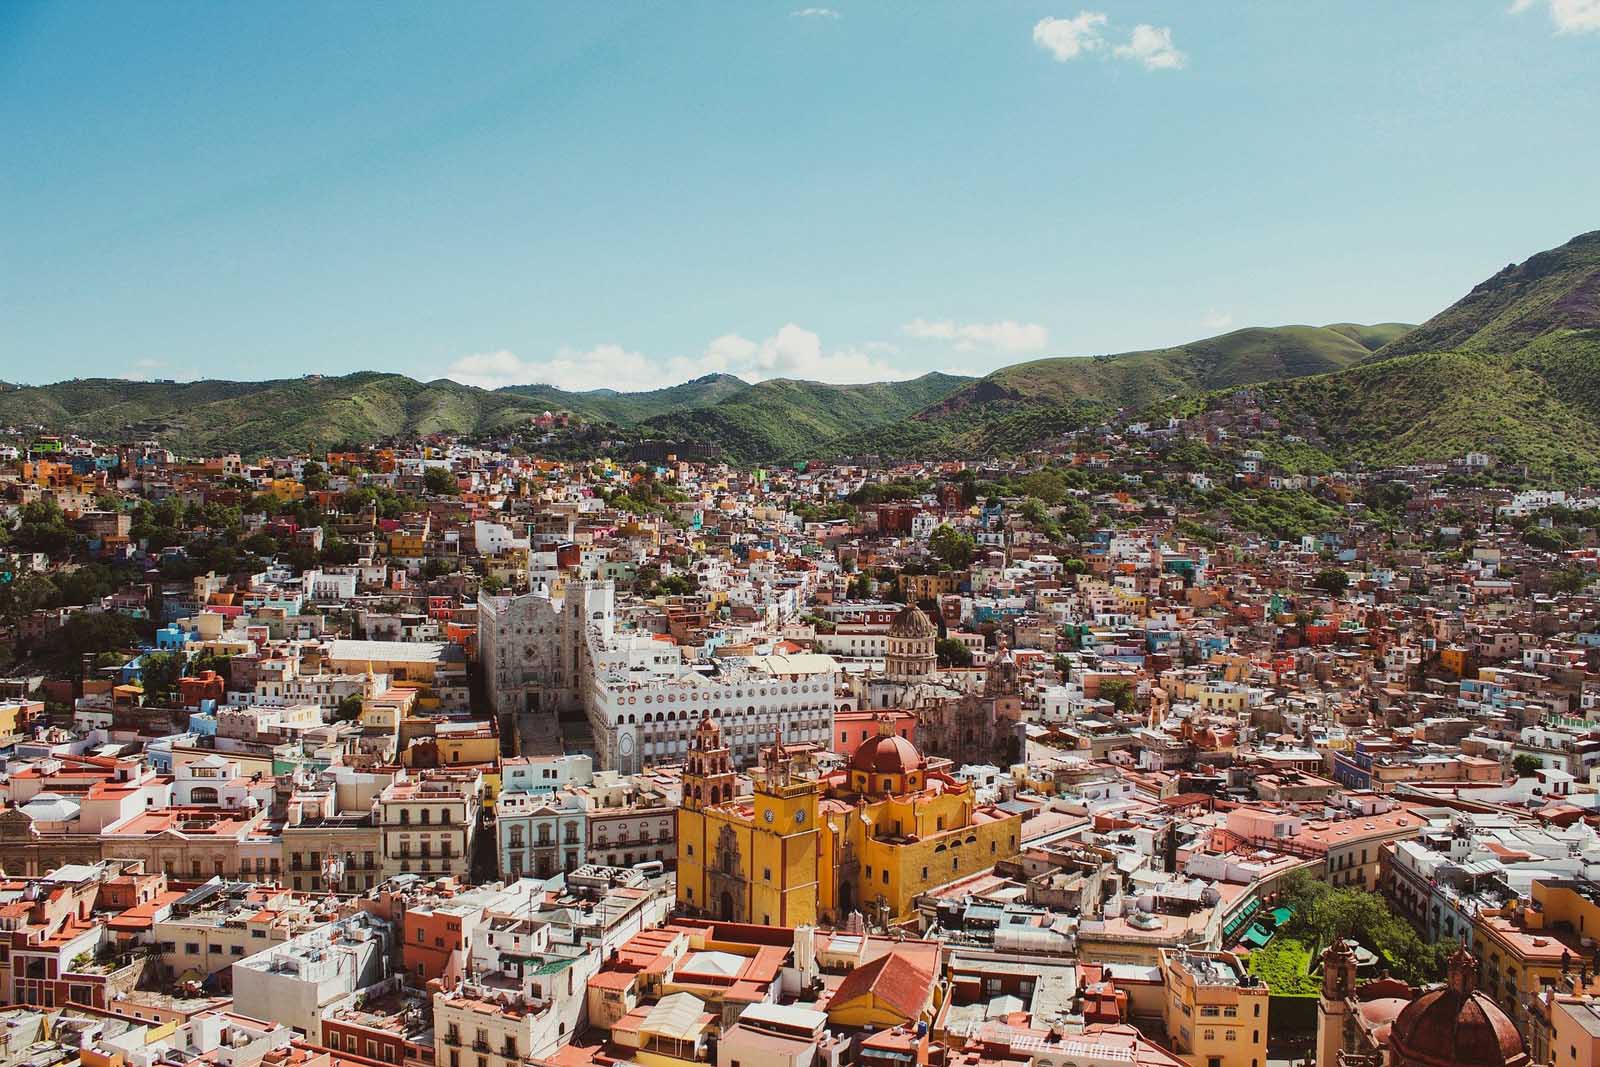 Places worth visiting in Mexico Guanajuato